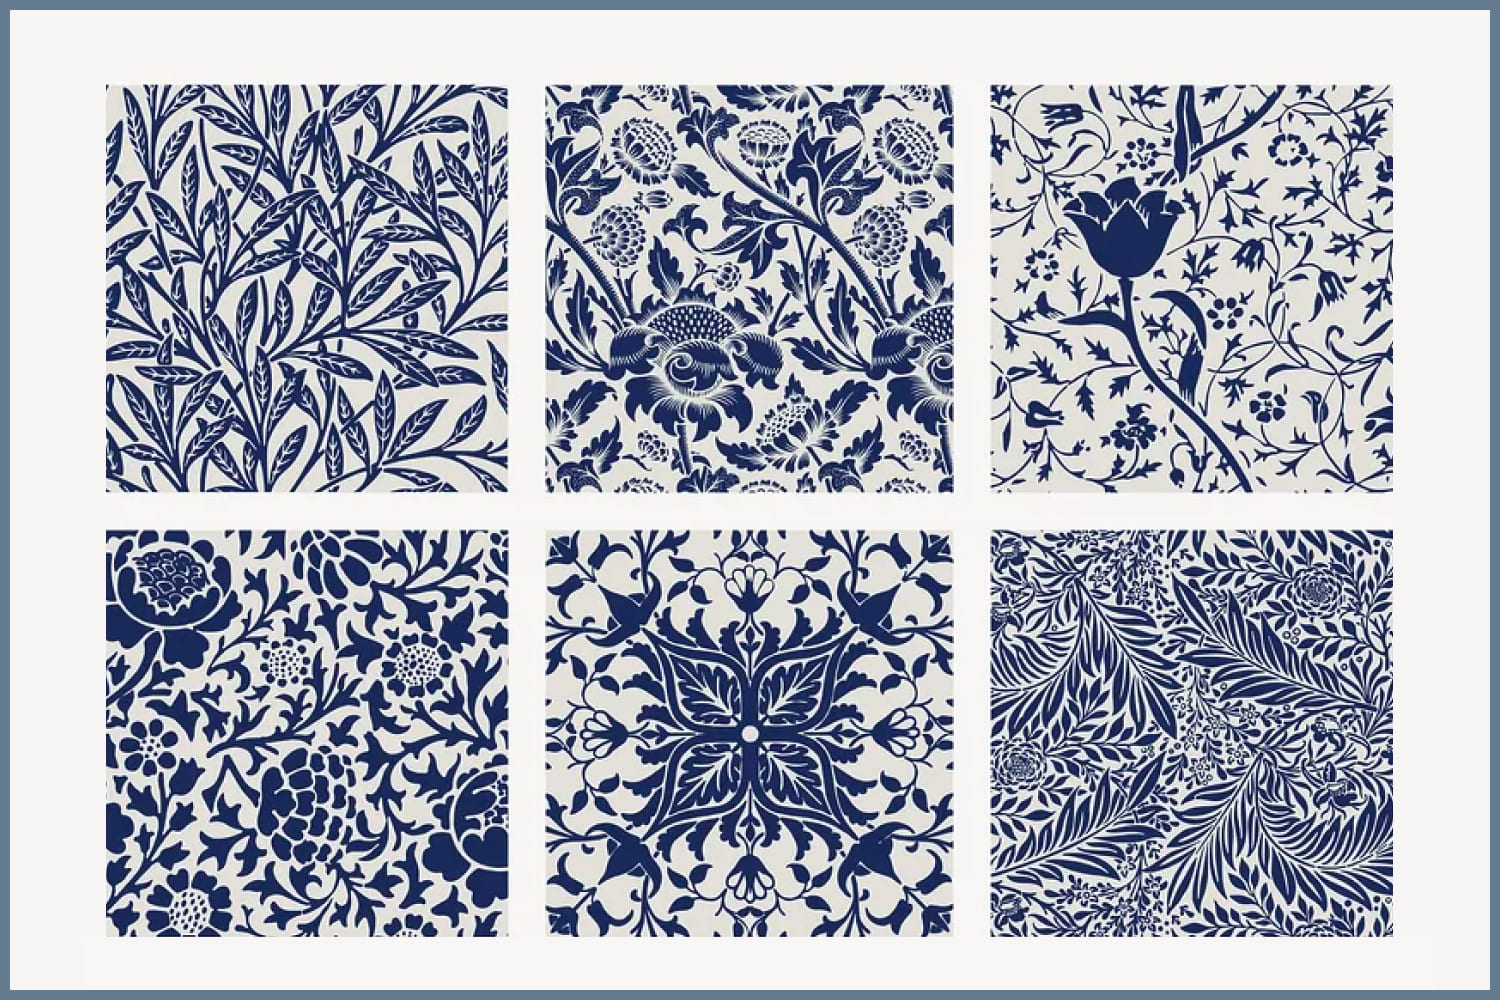 Collage of blue patterns with drawings of flowers and leaves.